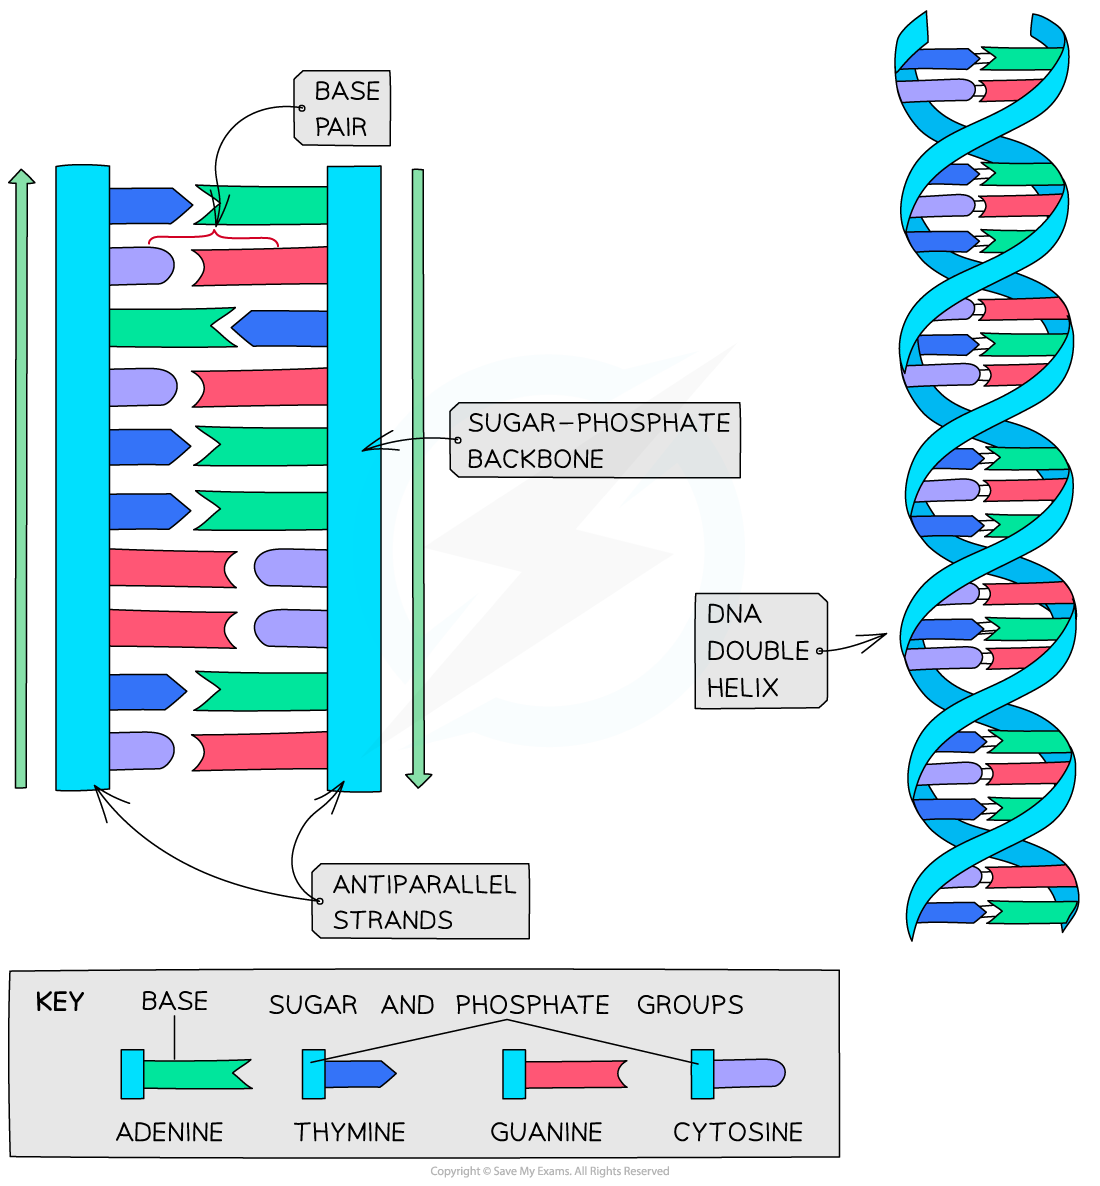 27.-DNA-double-helix-formation